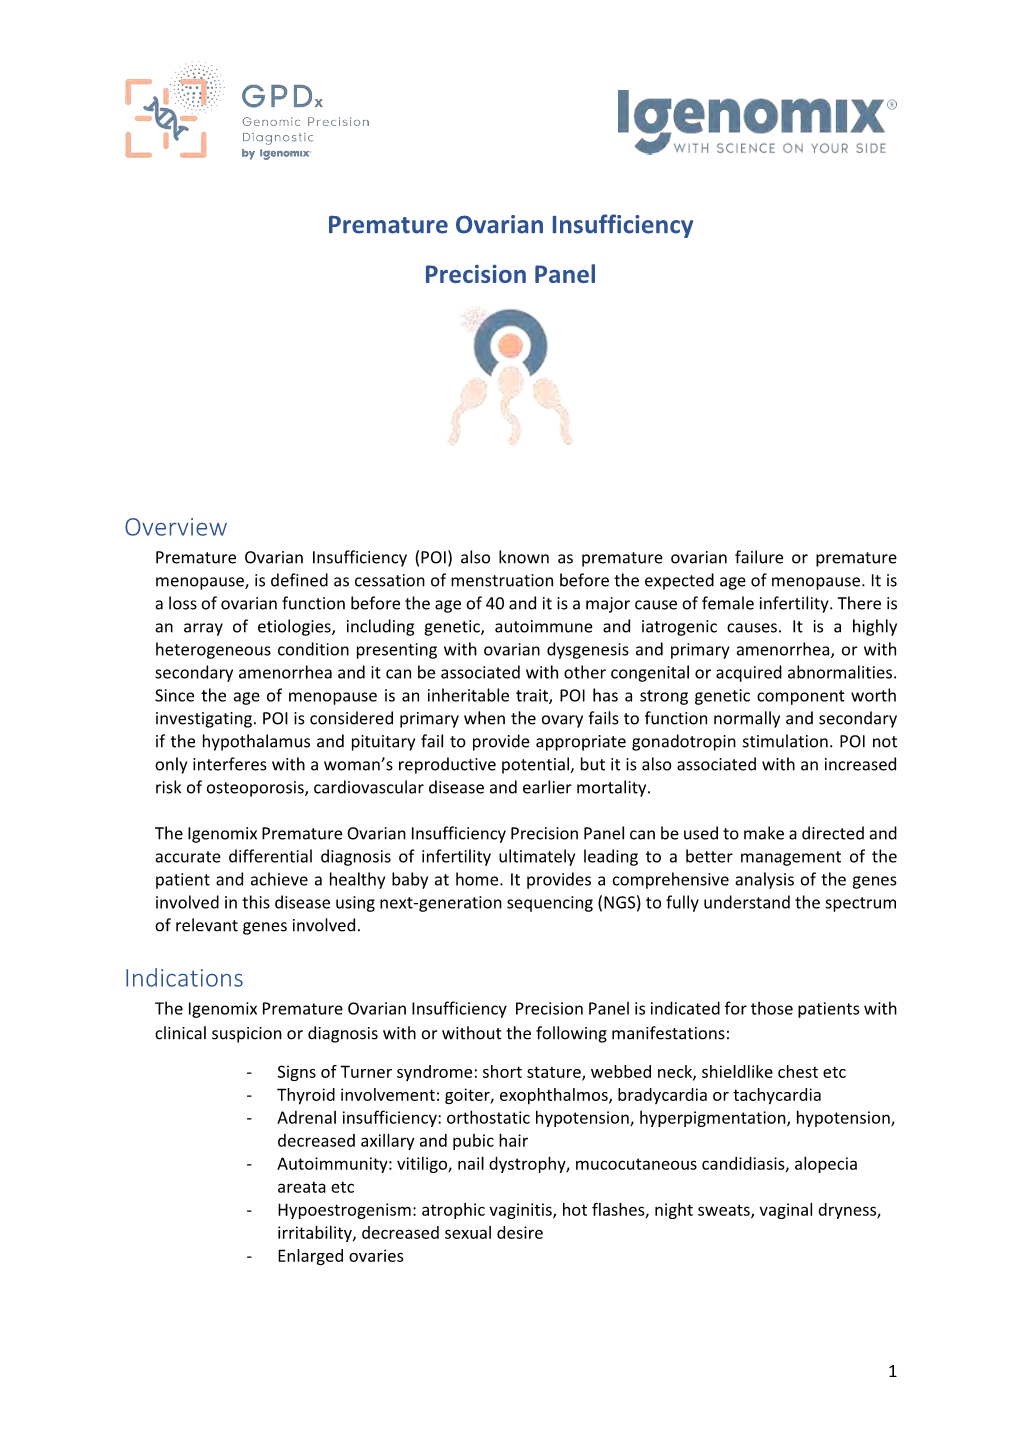 Premature Ovarian Insufficiency Precision Panel Overview Indications